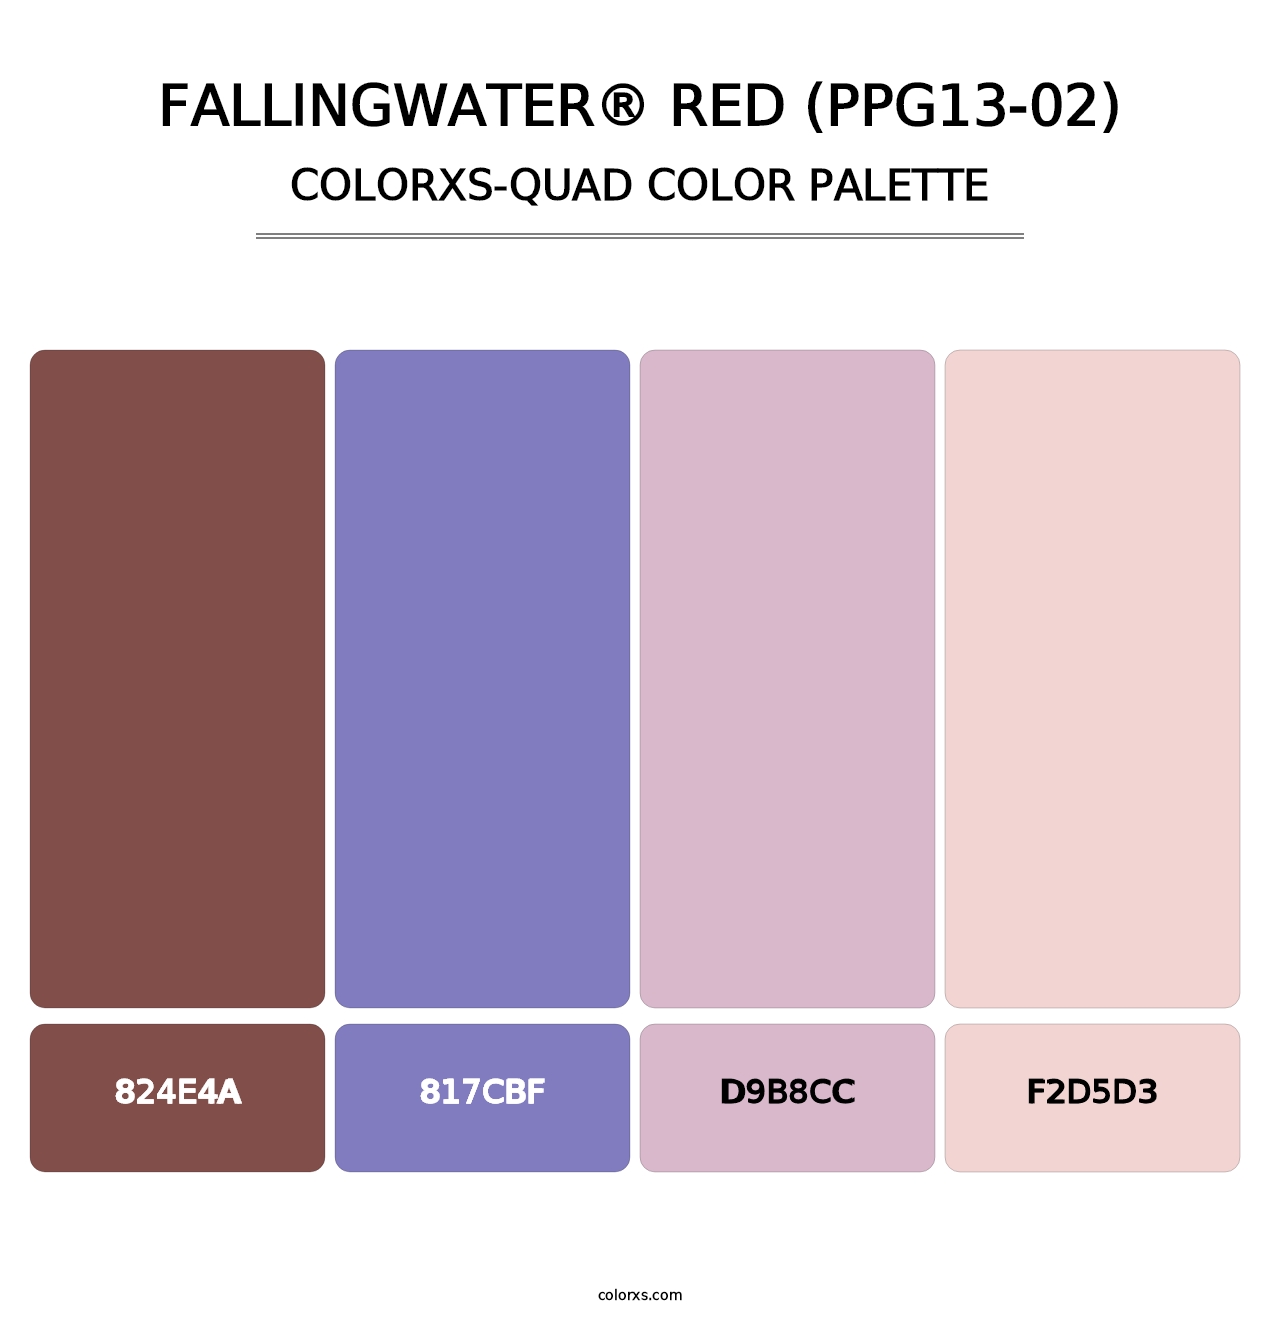 Fallingwater® Red (PPG13-02) - Colorxs Quad Palette